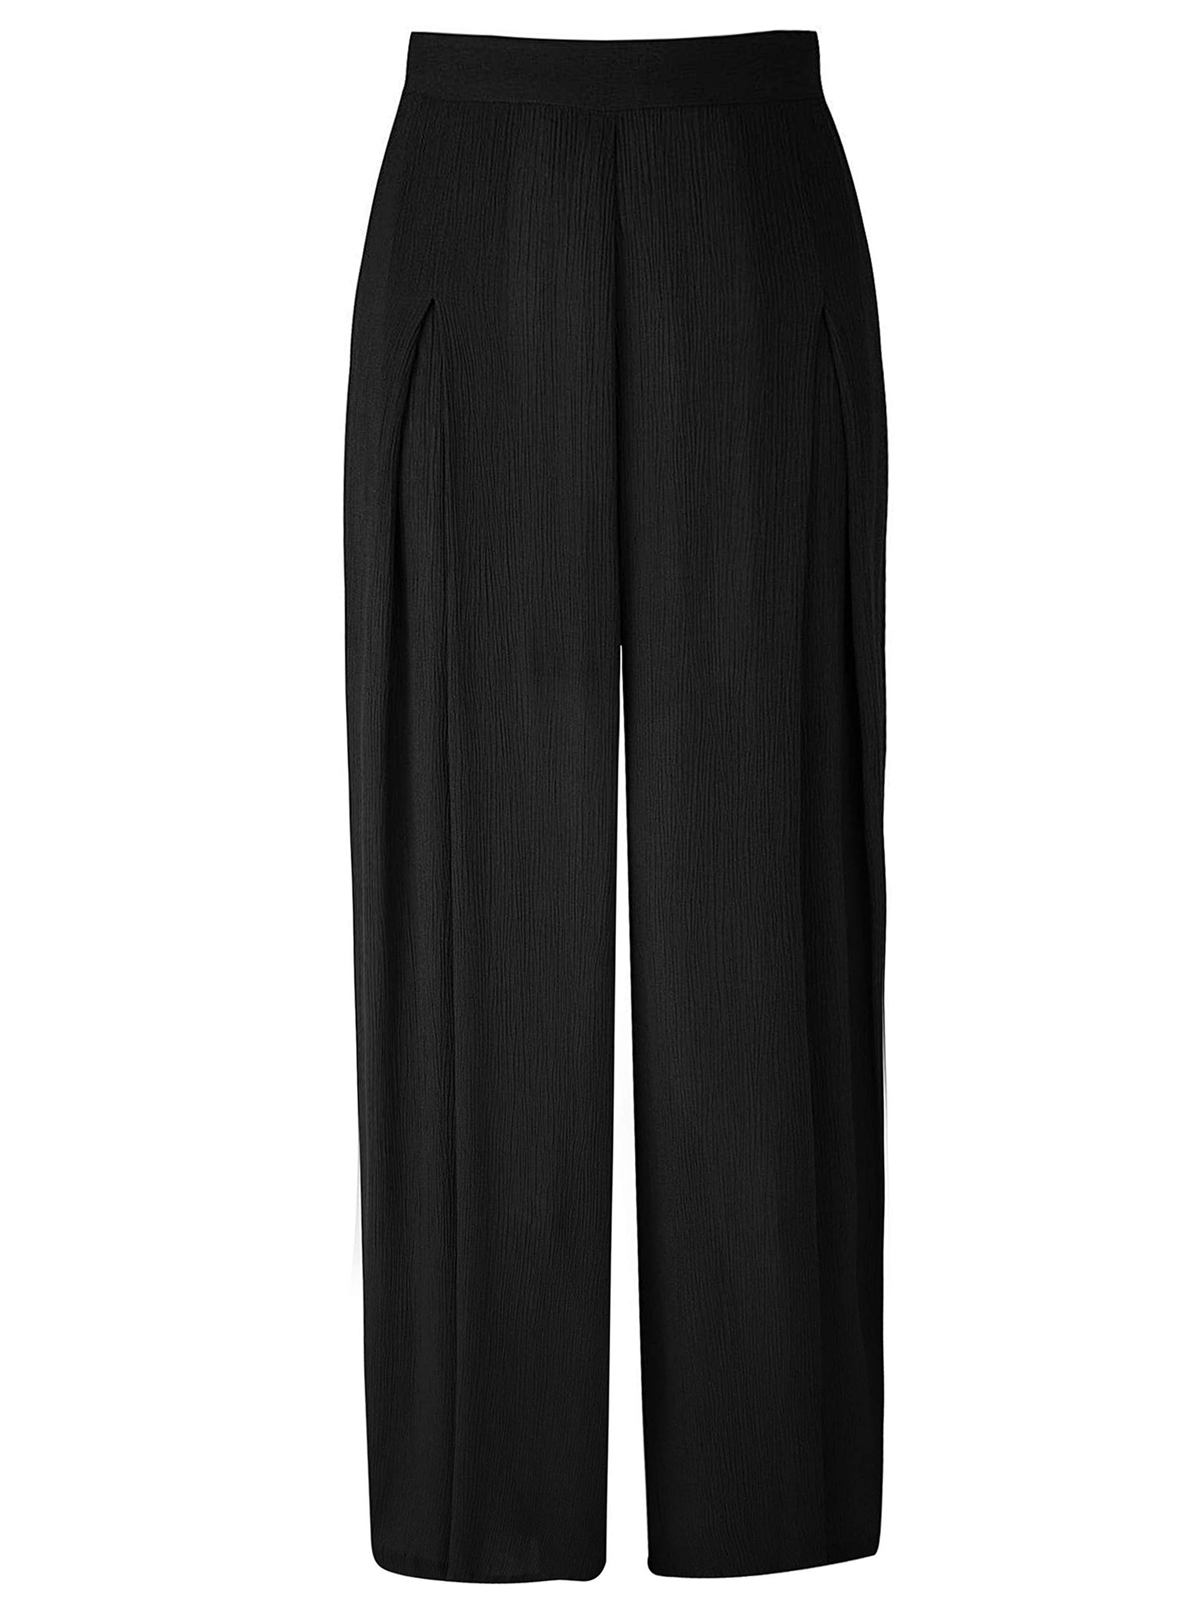 Joanna Hope - - BLACK Crinkle Palazzo Trousers - Plus Size 18 to 28